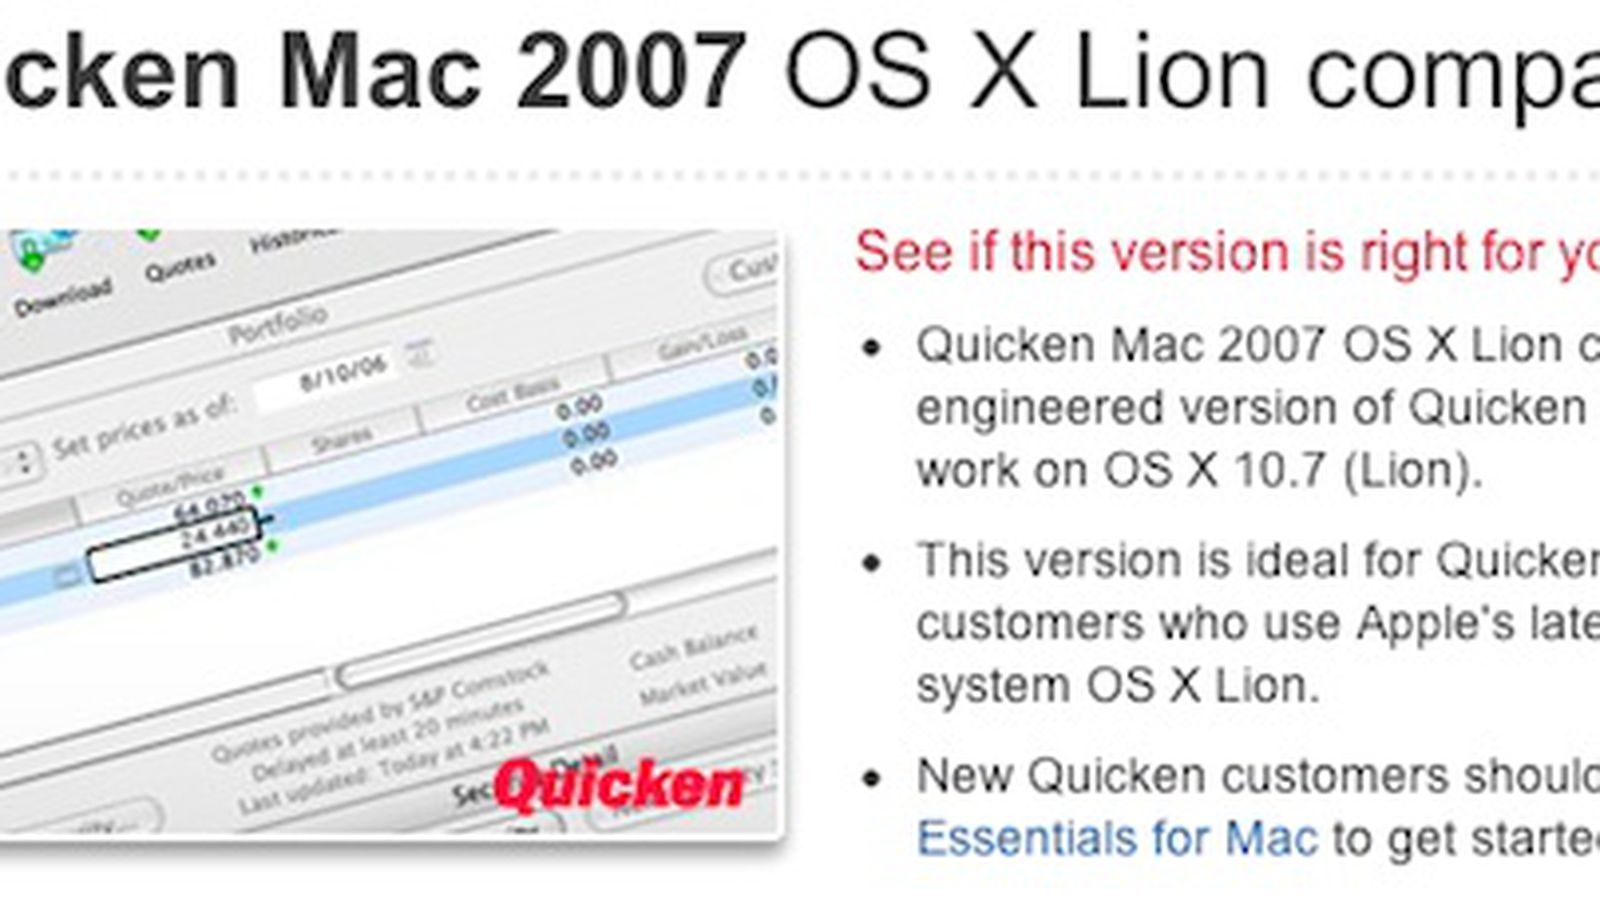 exporting from quicken for mac 2015 and importing into quicken for mac 2015 erases memos